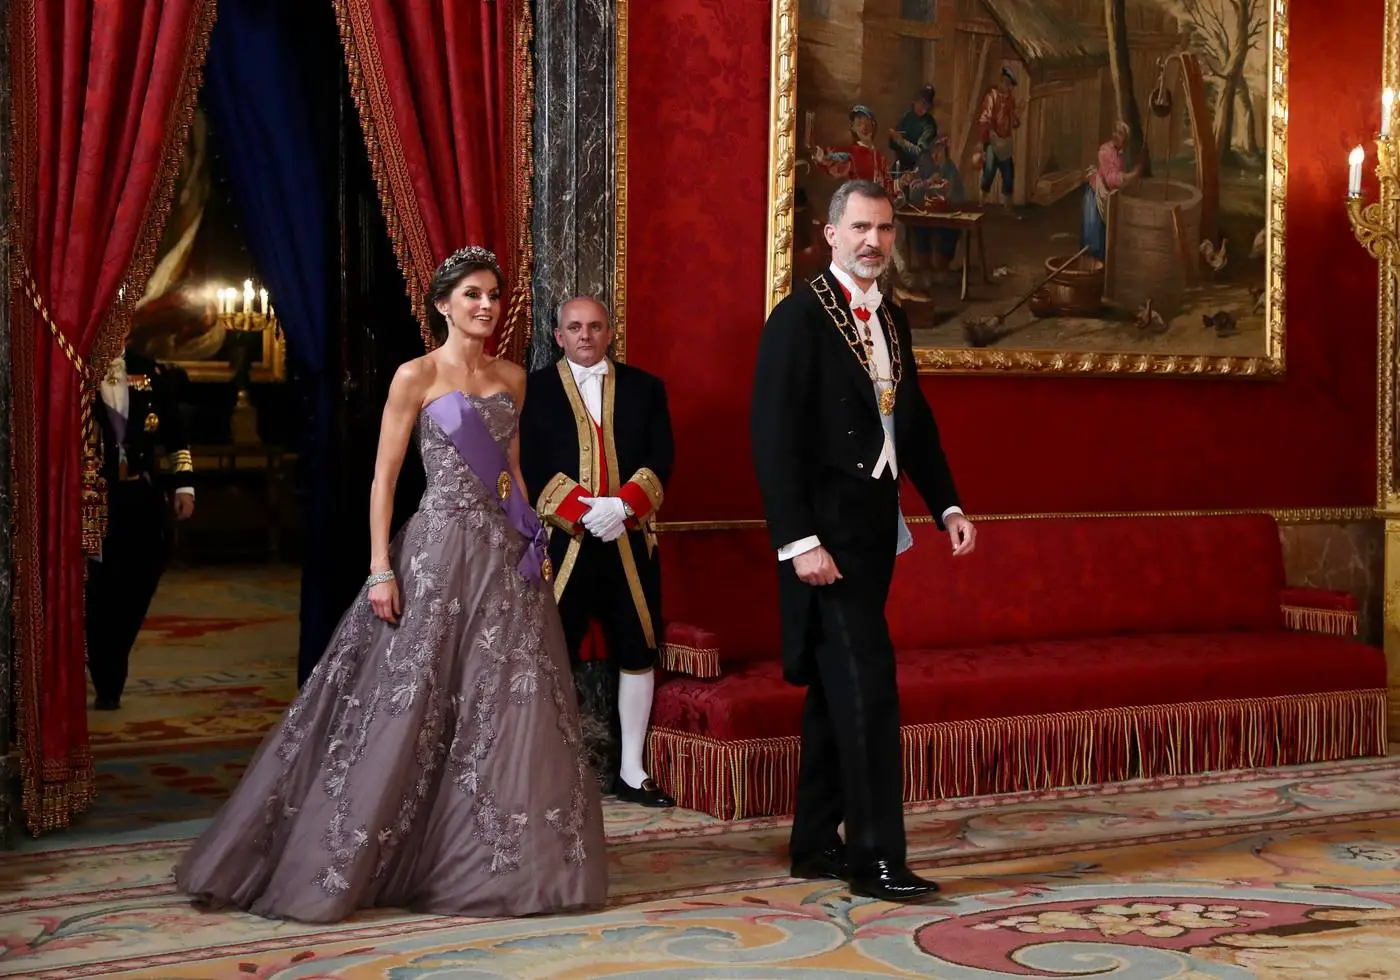 King Felipe and Queen Letizia arriving in the Throne Room for the State Banquet hosted for Peru President and First Lady